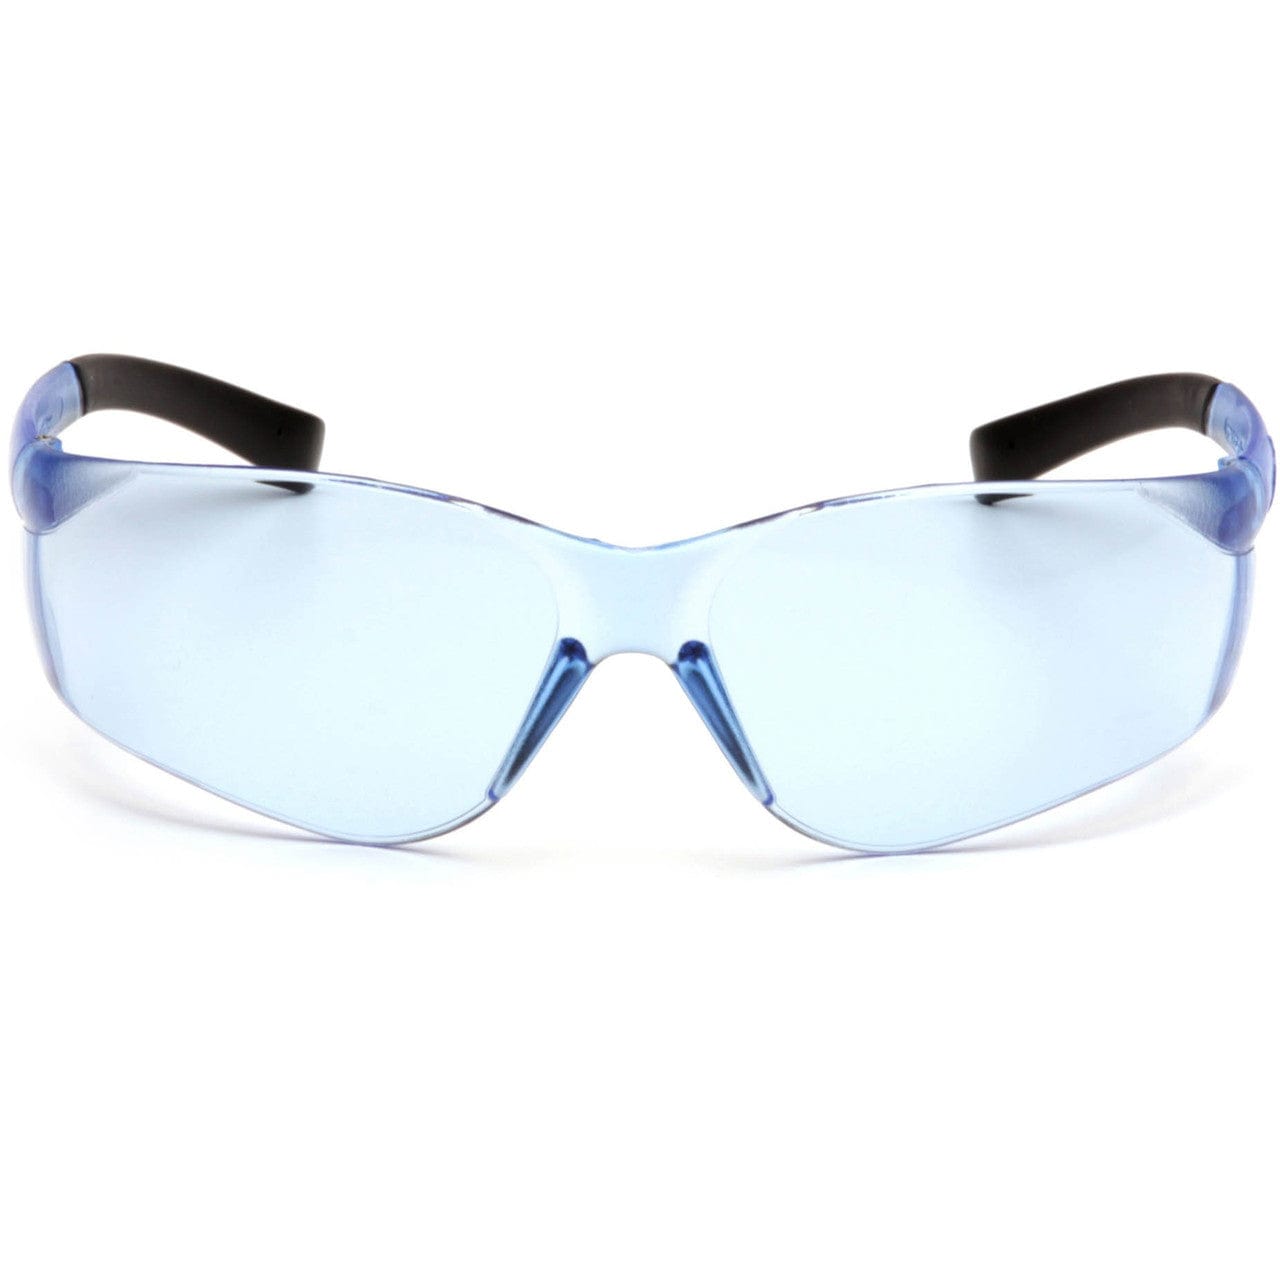 Pyramex Ztek Safety Glasses with Infinity Blue Lens S2560S Front View